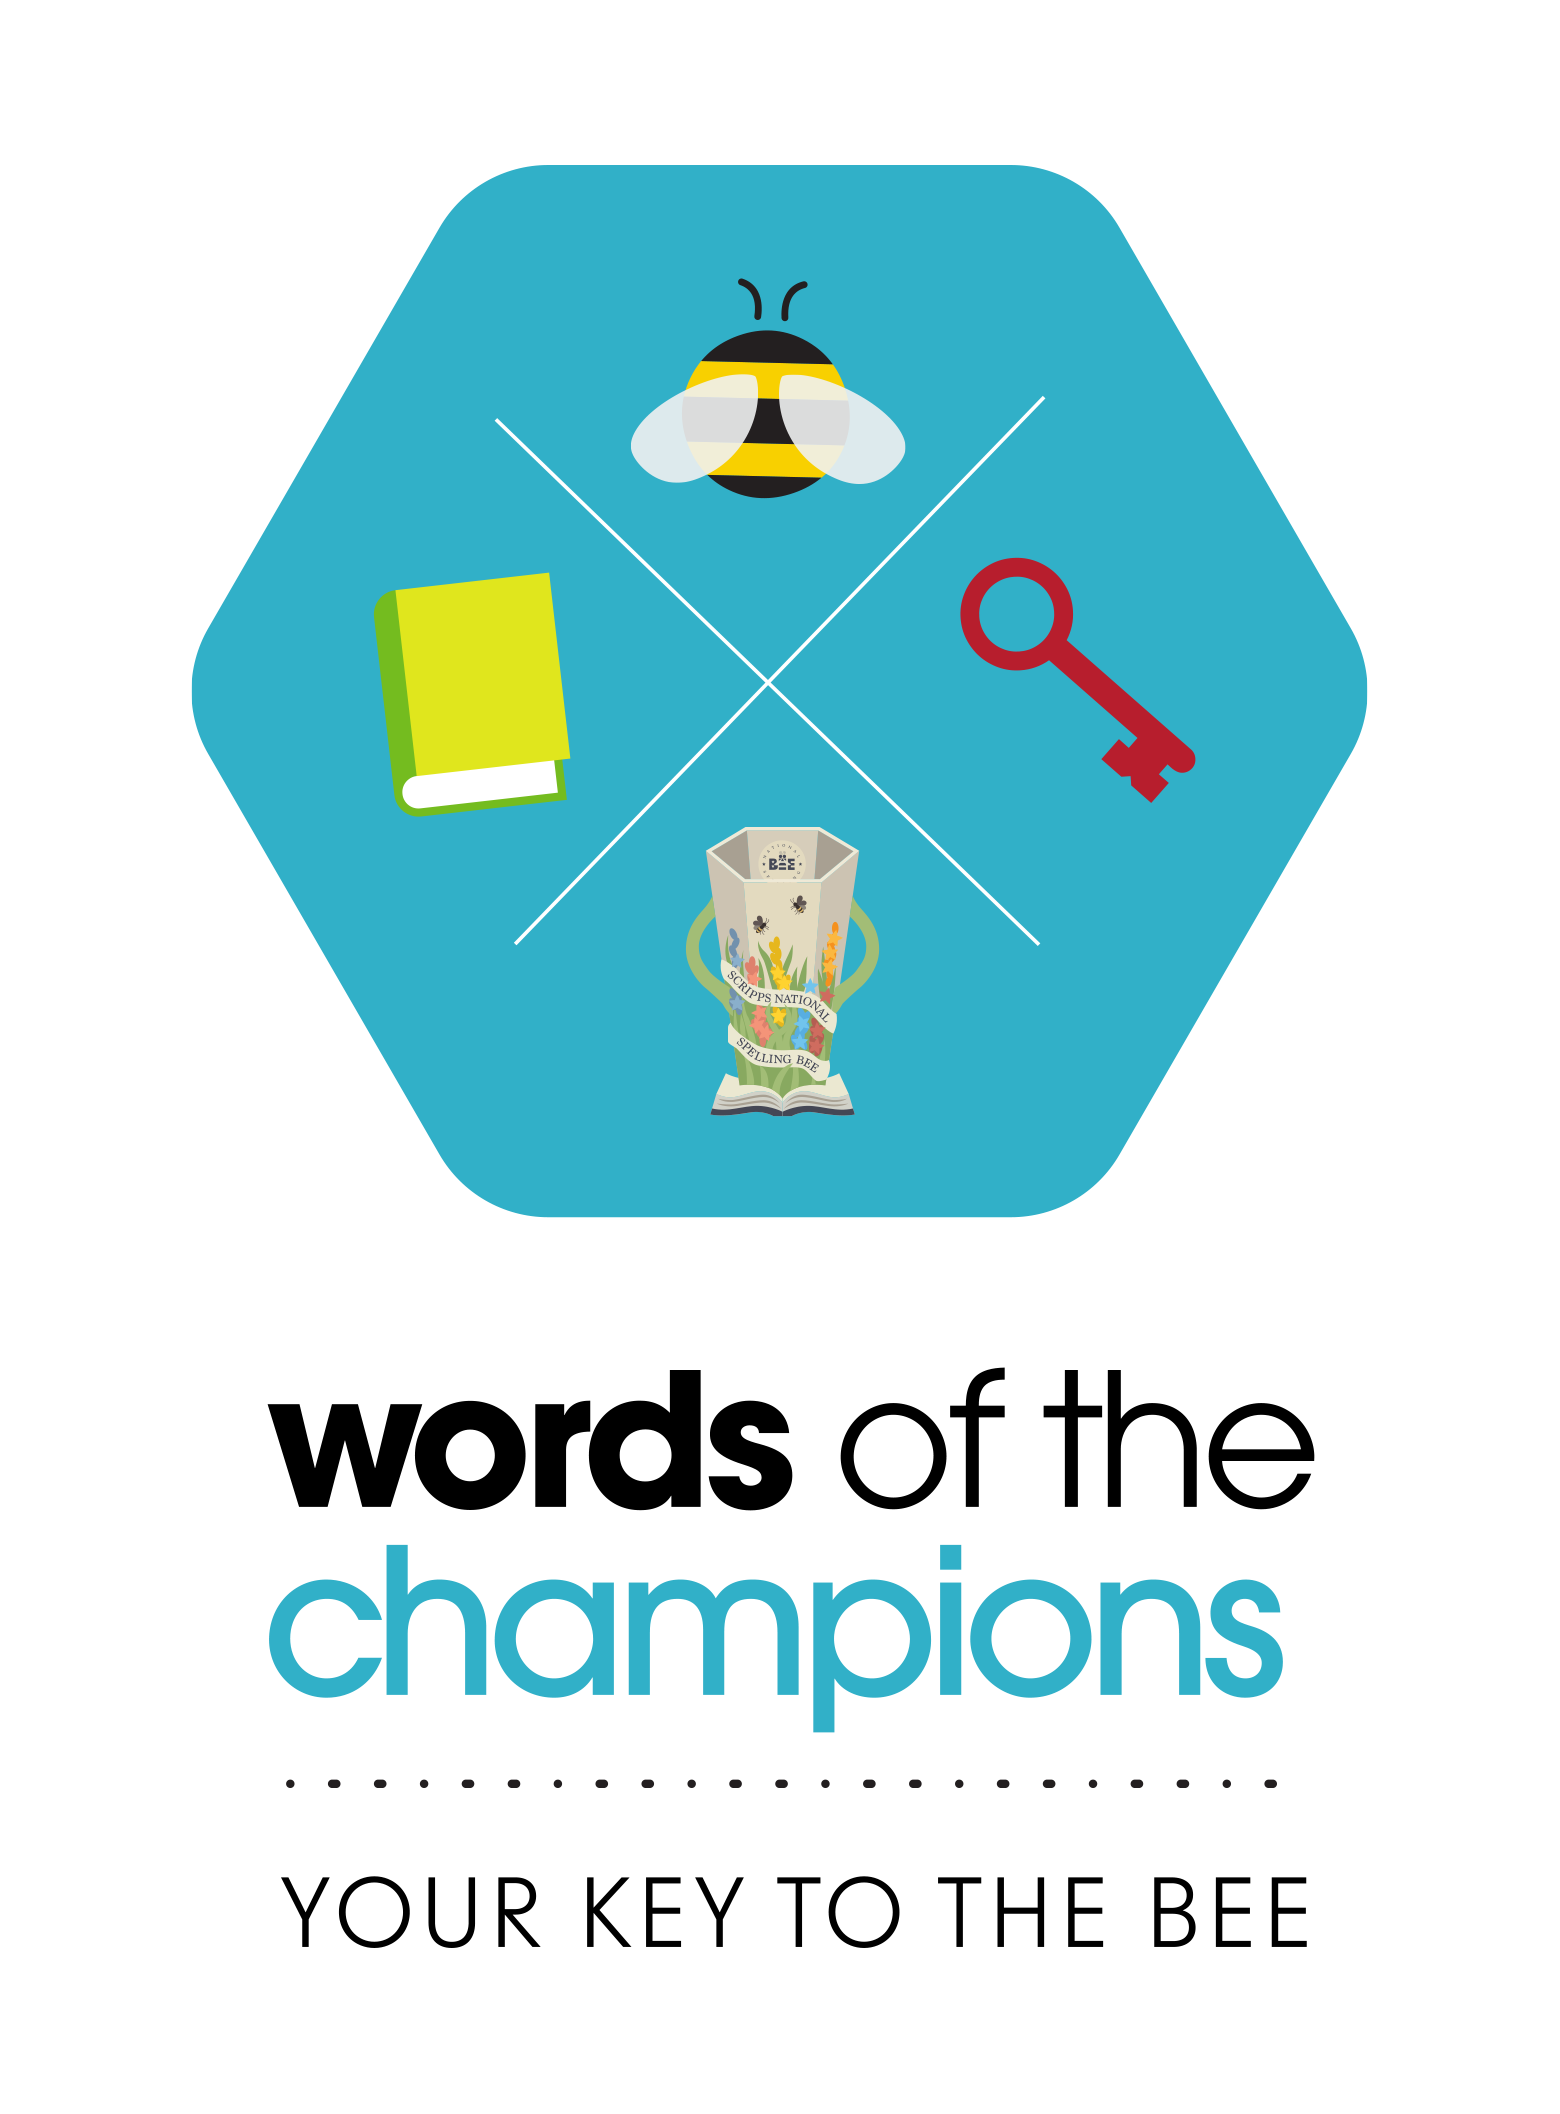 Words of the Champions regional spelling bee study list logo